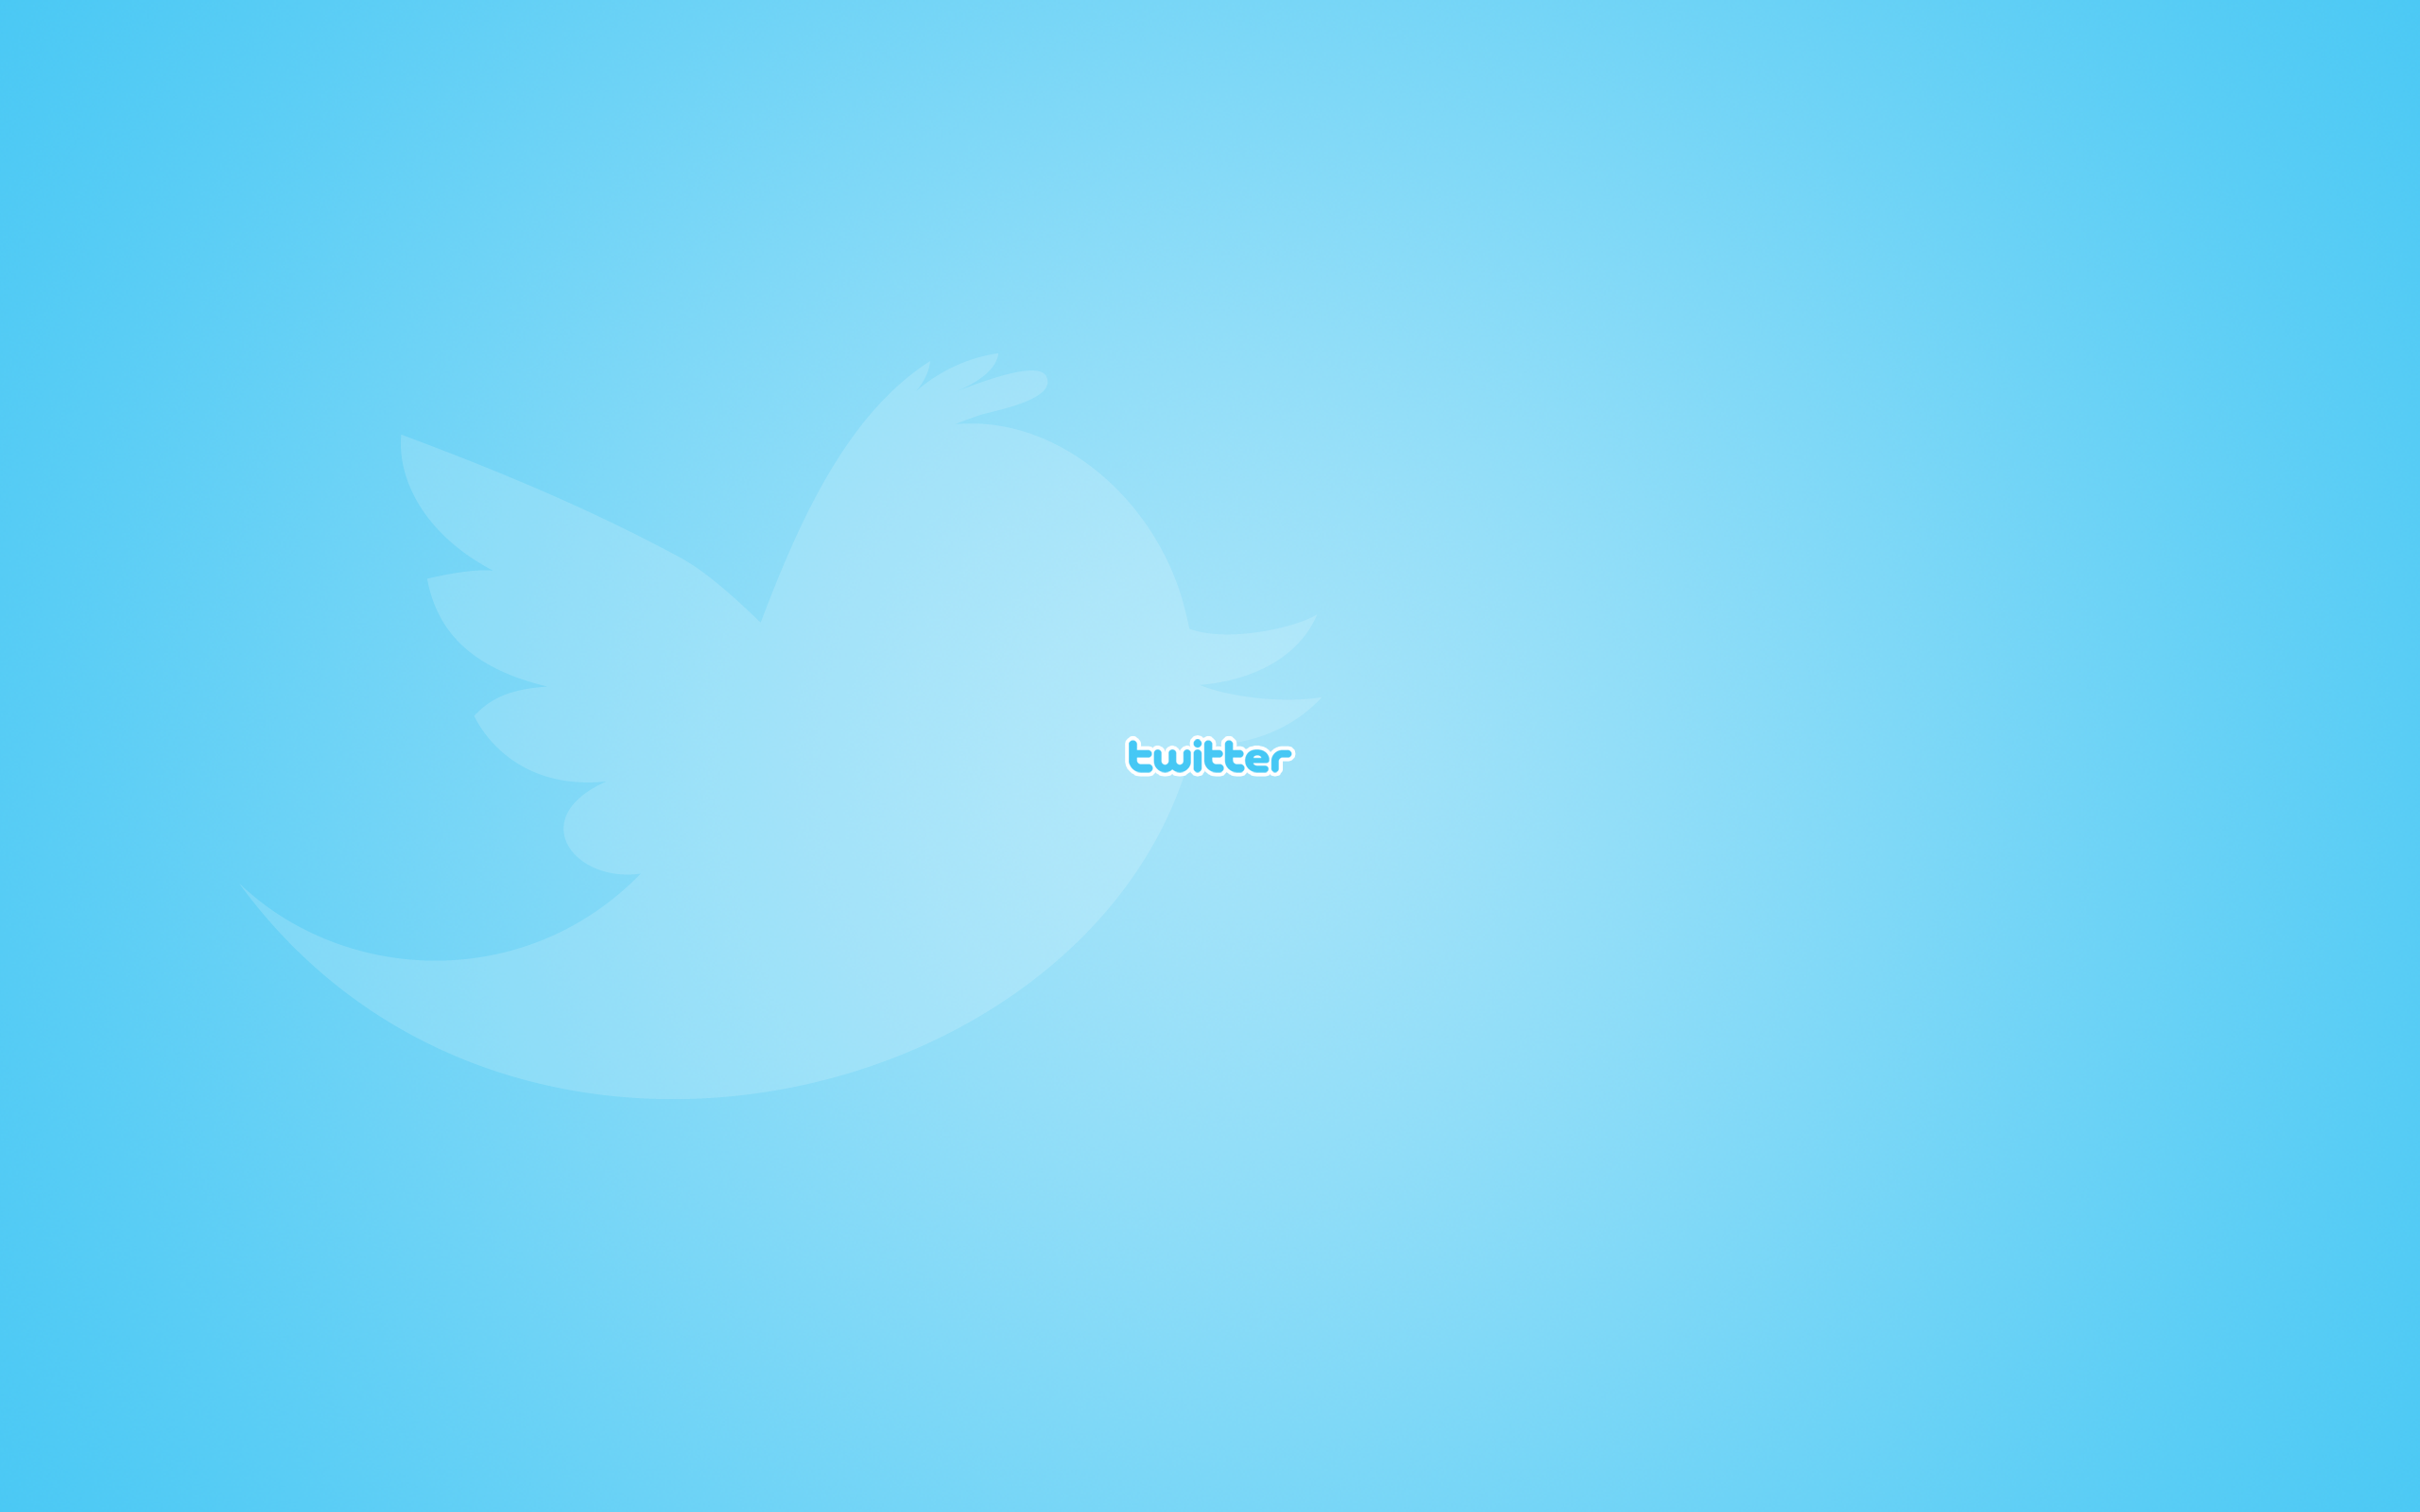 Twitter 4K wallpapers for your desktop or mobile screen free and easy to  download